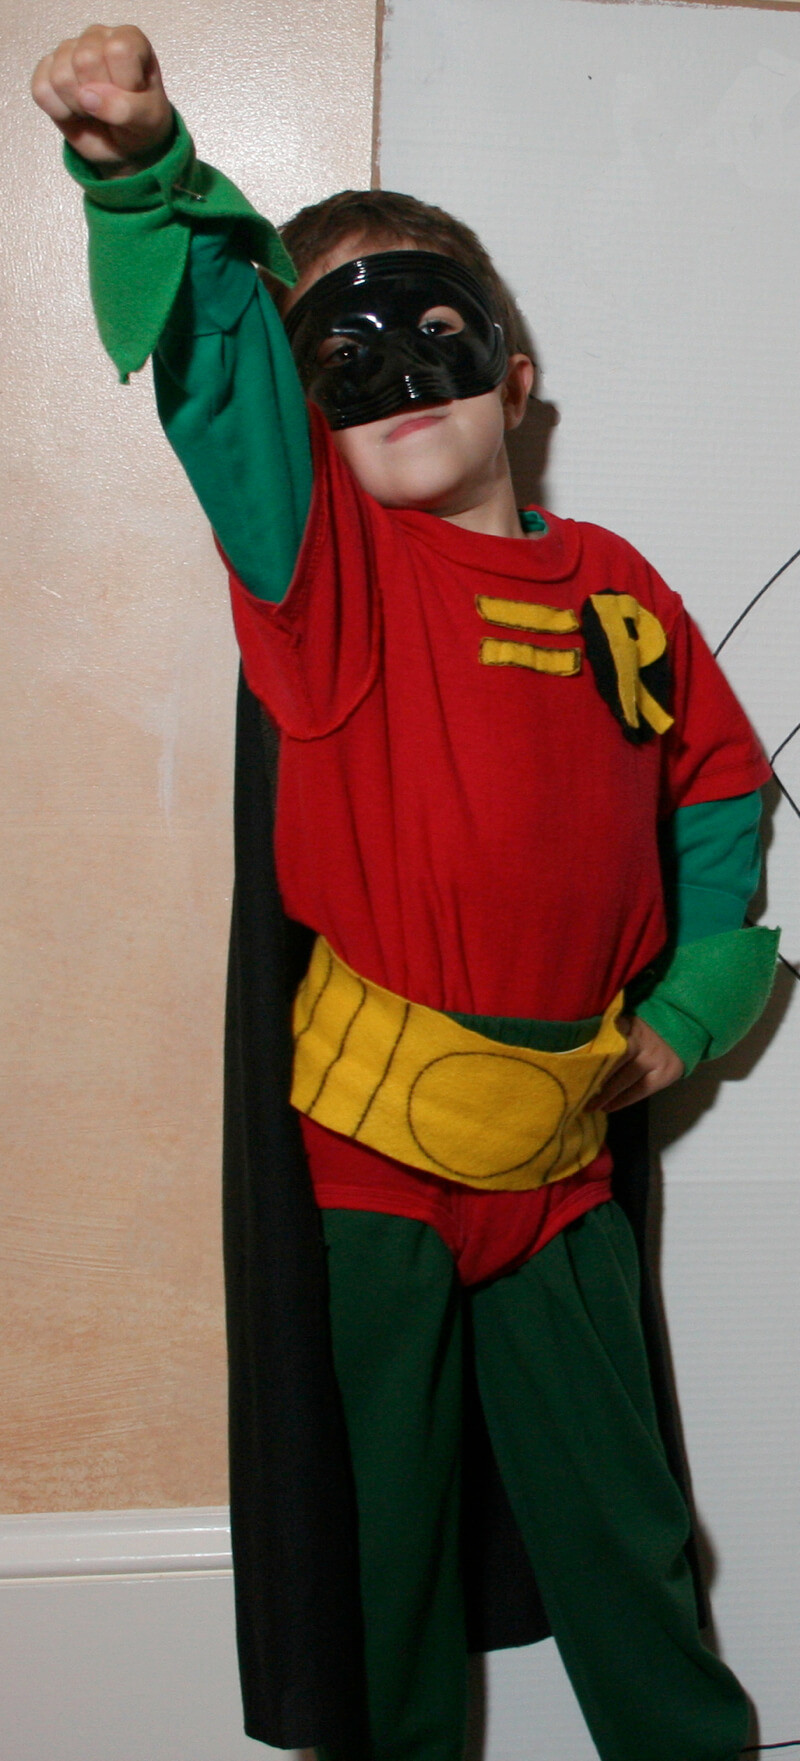 DIY Superhero Costume
 12 DIY Superhero Costume Ideas for Kids